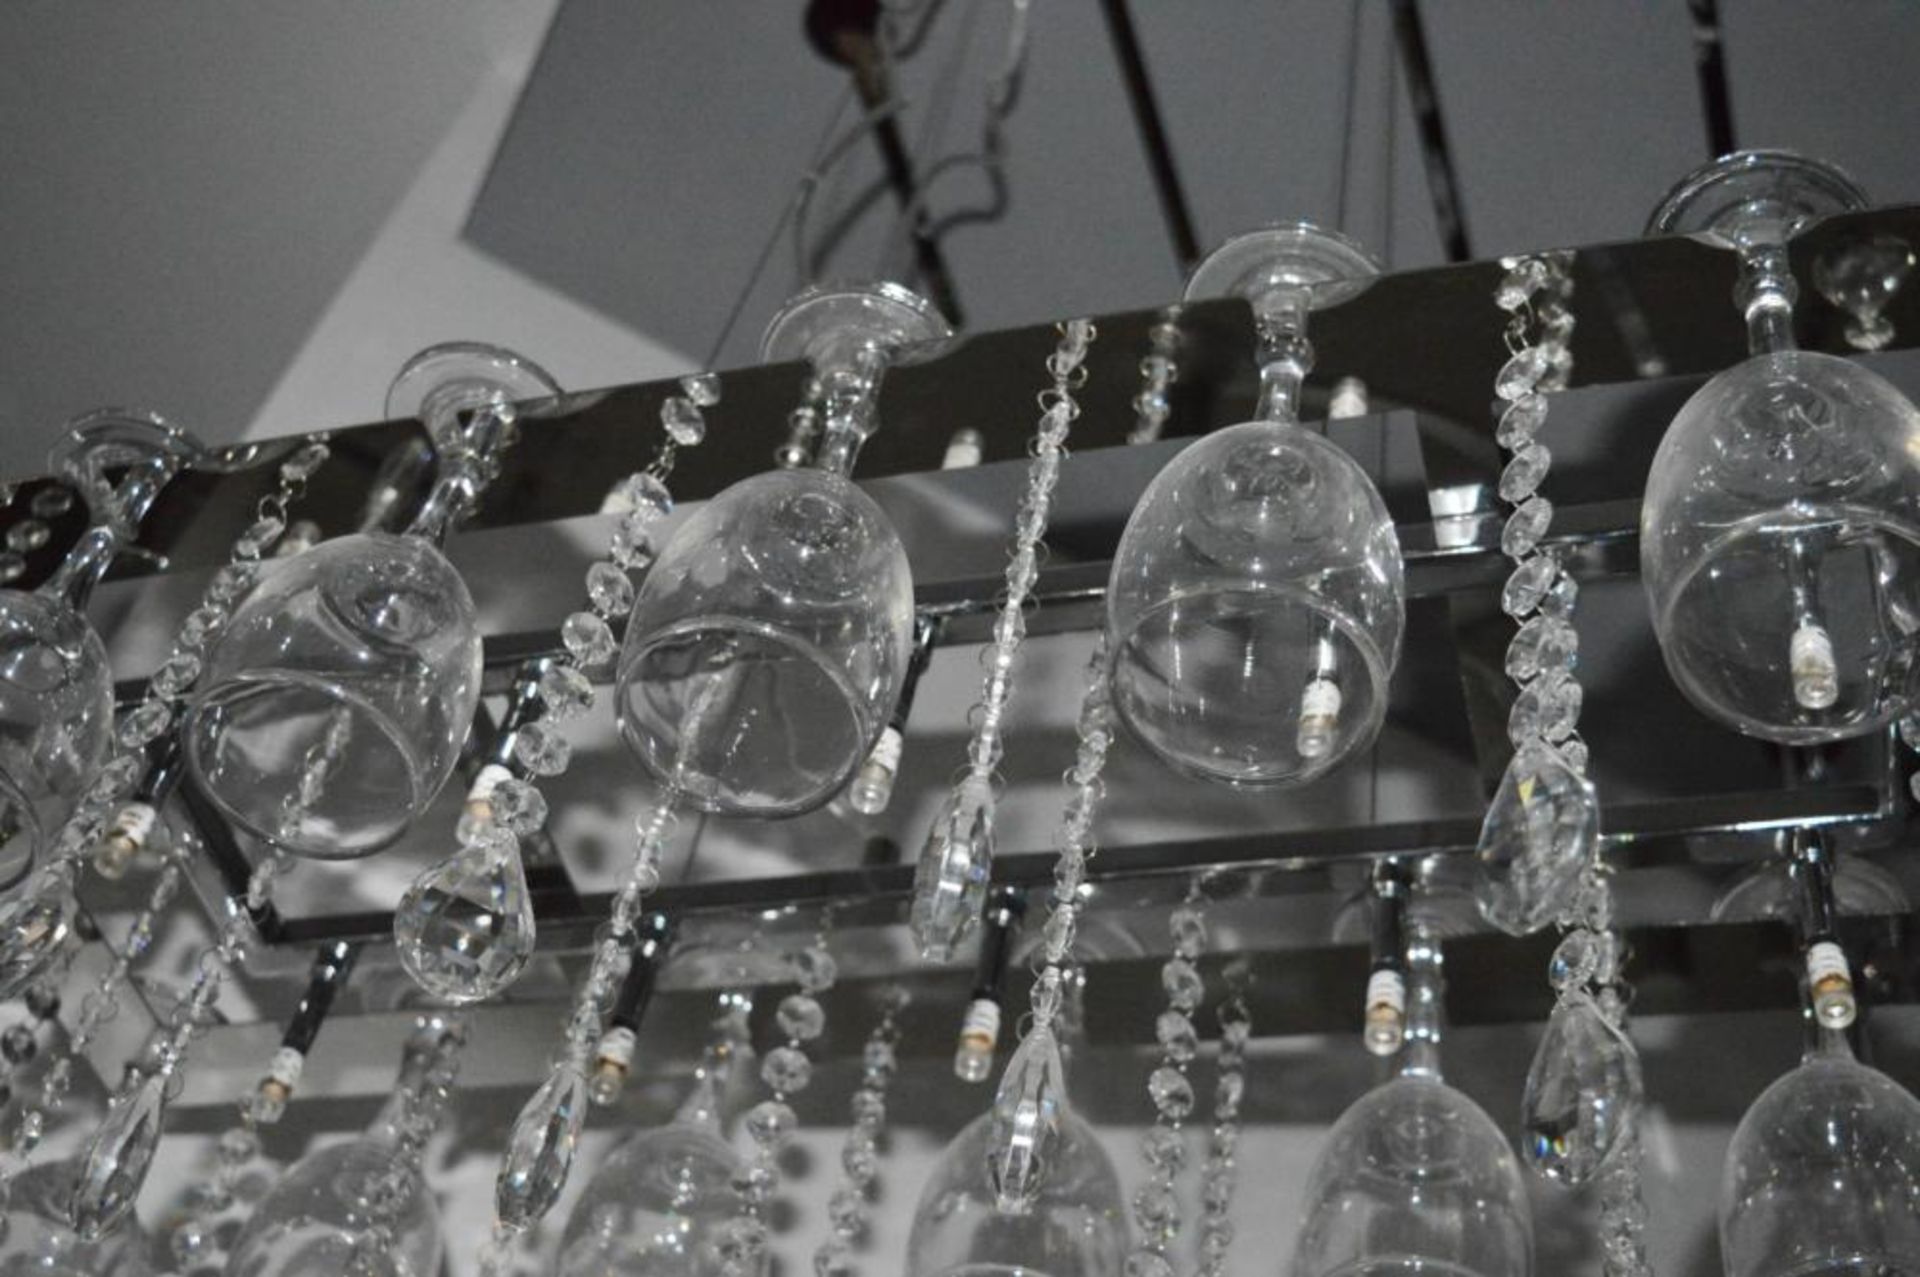 1 x Vino Chrome 10 Light Suspended Light Fitting With Crystal Button Drops and Sixteen Wine Glasses - Image 4 of 7